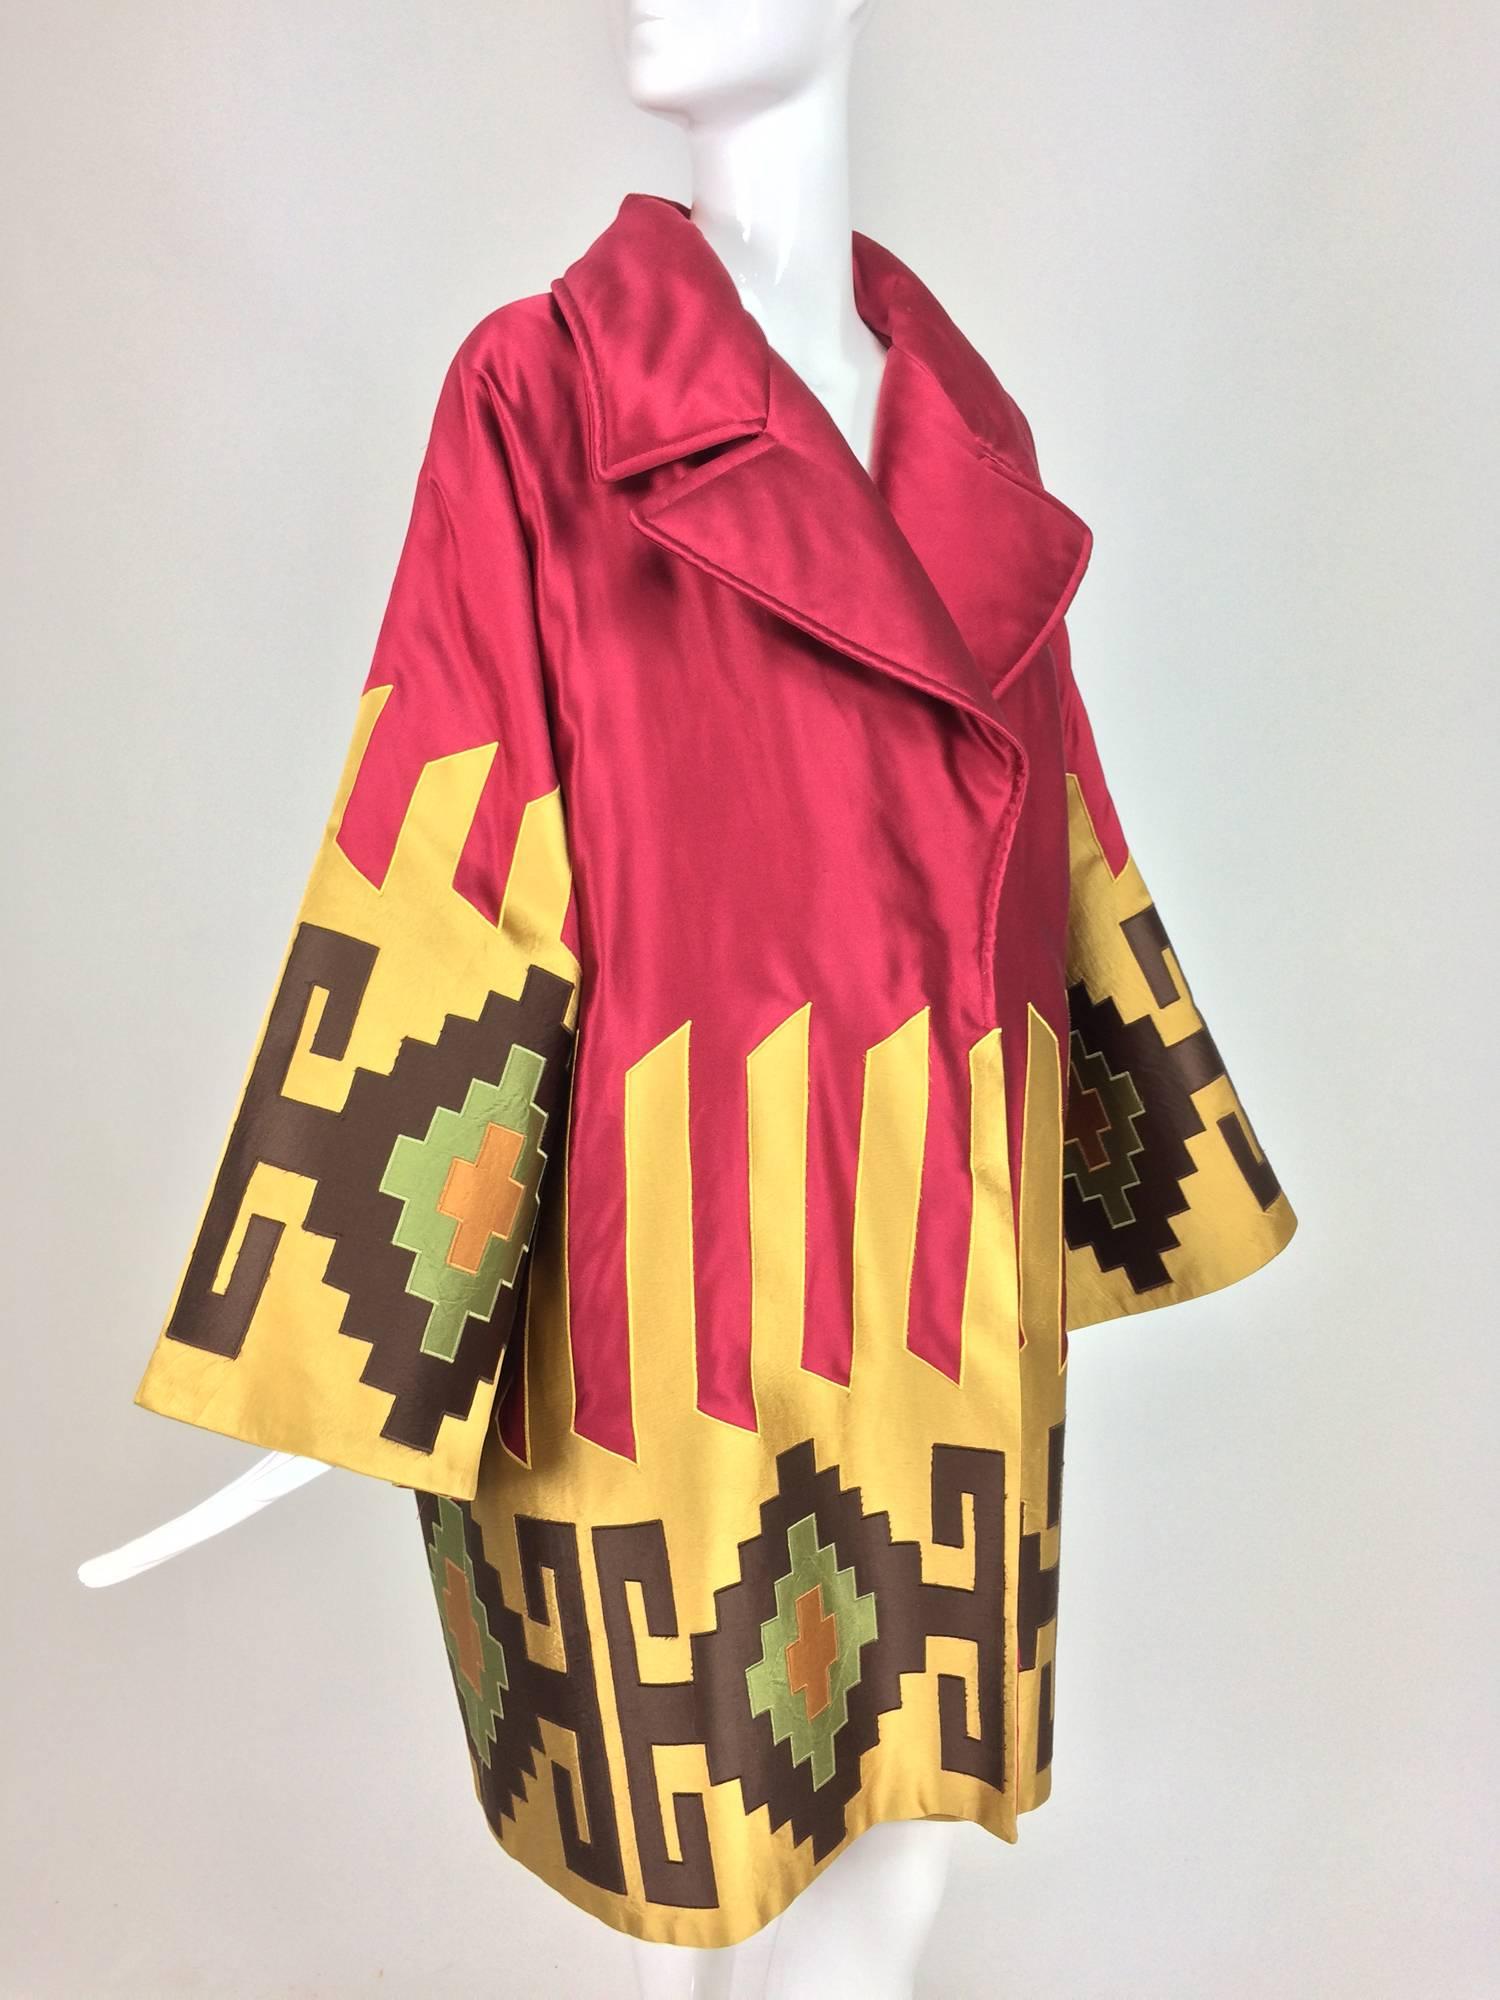 Valentino quilted silk applique kimono sleeve wrap coat 1980s...Geometric applique in gold, brown and green set against rich garnet silk...The coat is quilted inside and interlined for warmth, it is light and not bulky...Wide kimono sleeves...Full